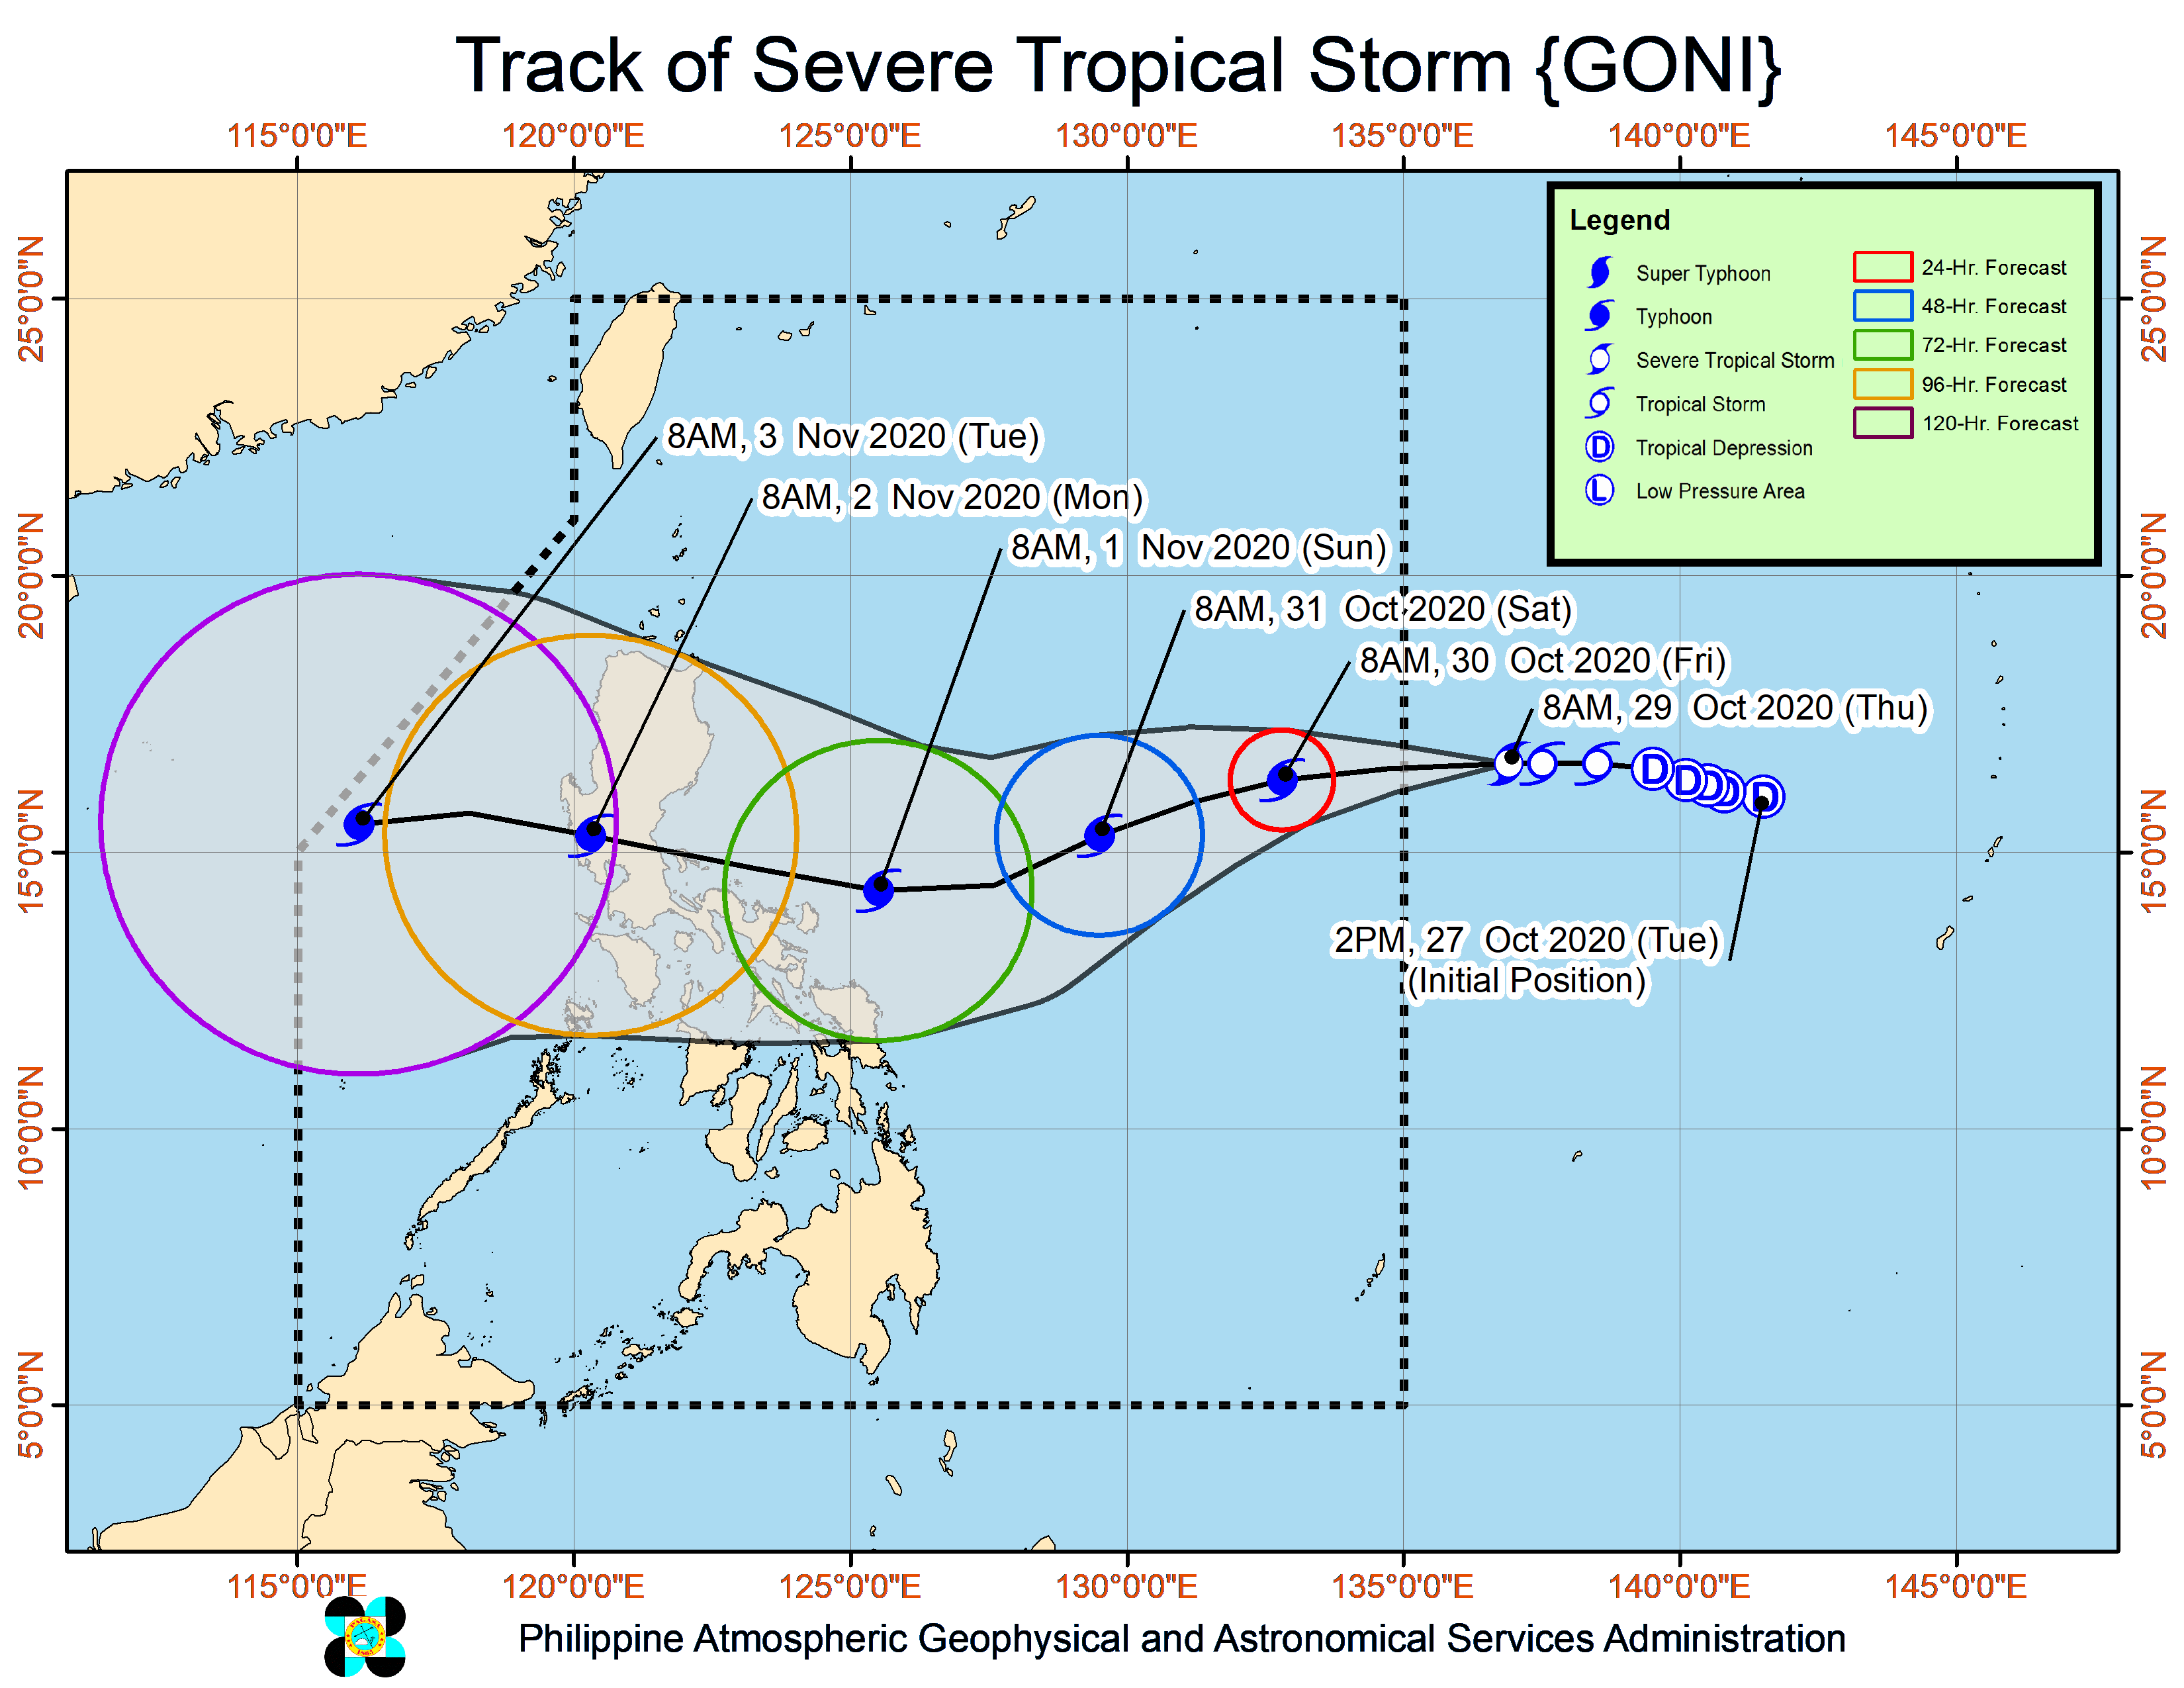 goni rolly Slight change in Goni’s predicted track puts Central Luzon, Metro Manila in crosshairs